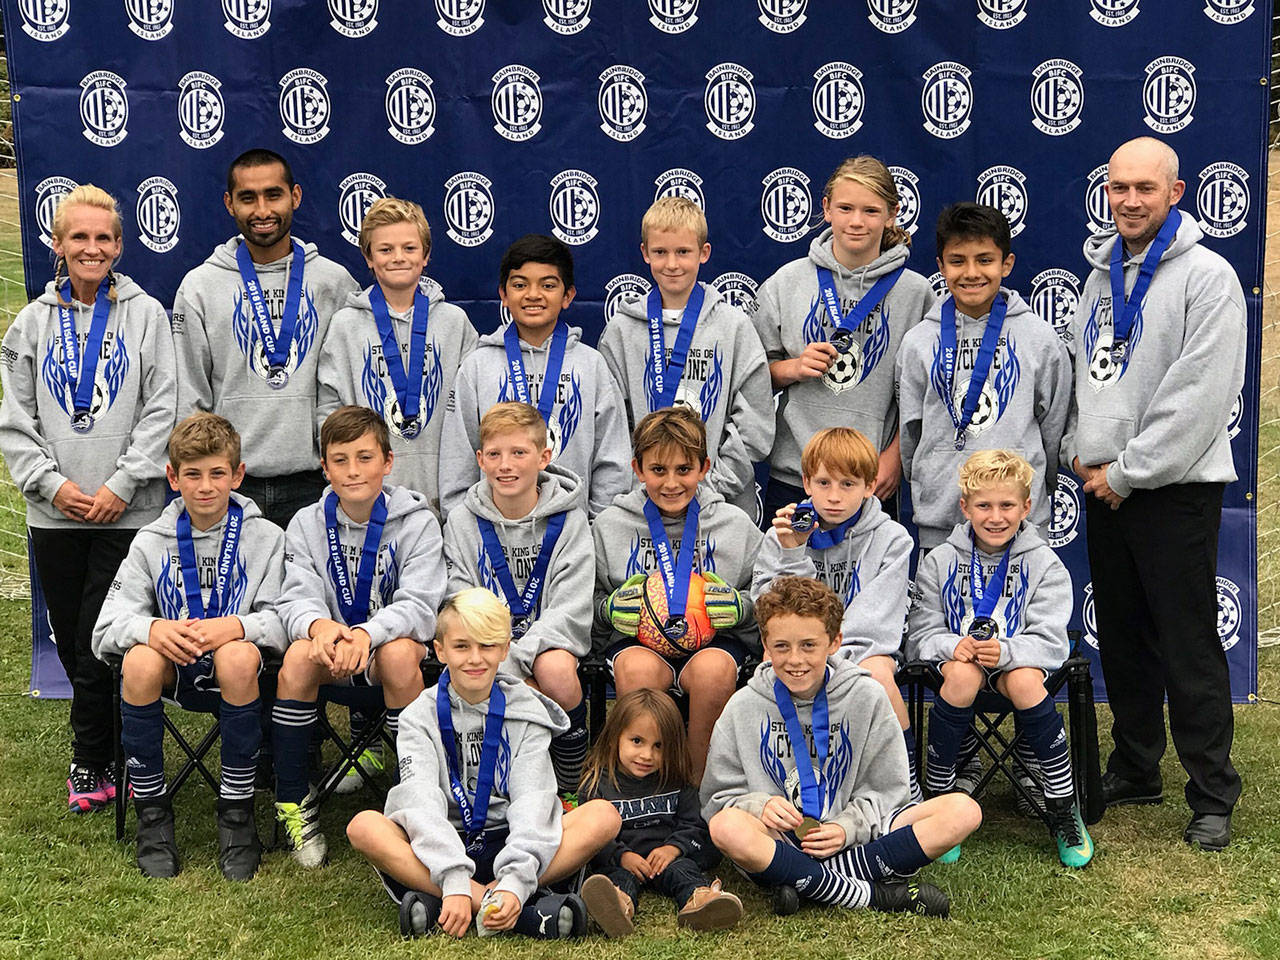 Youth soccer: Storm King Cyclone squad takes second at Bainbridge Cup